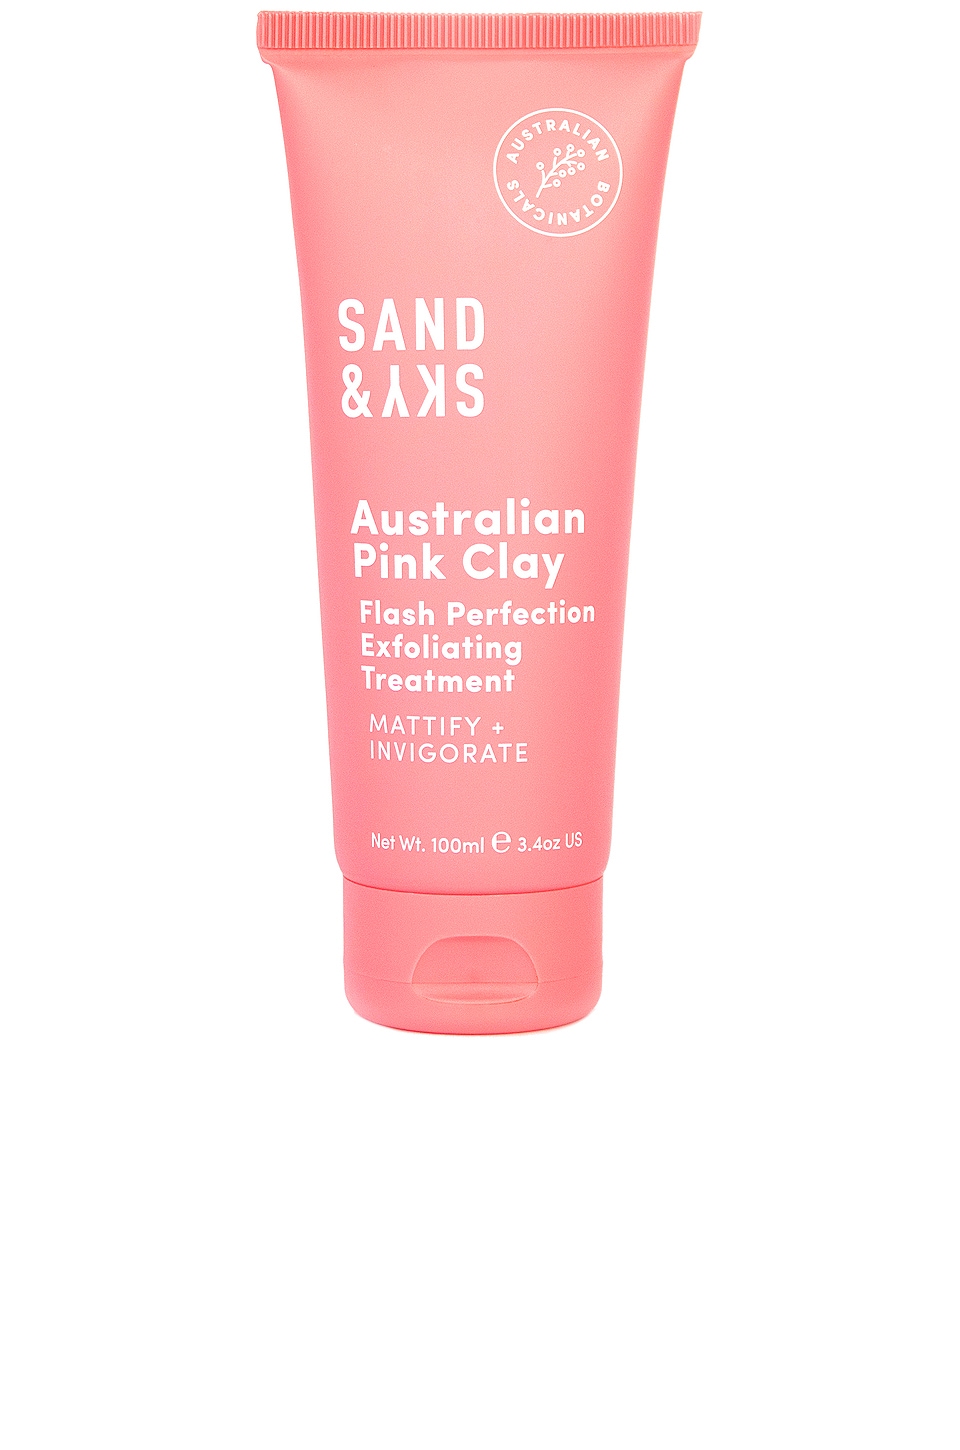 SAND & SKY PINK CLAY FLASH PERFECTION EXFOLIATING TREATMENT,SSKR-WU3